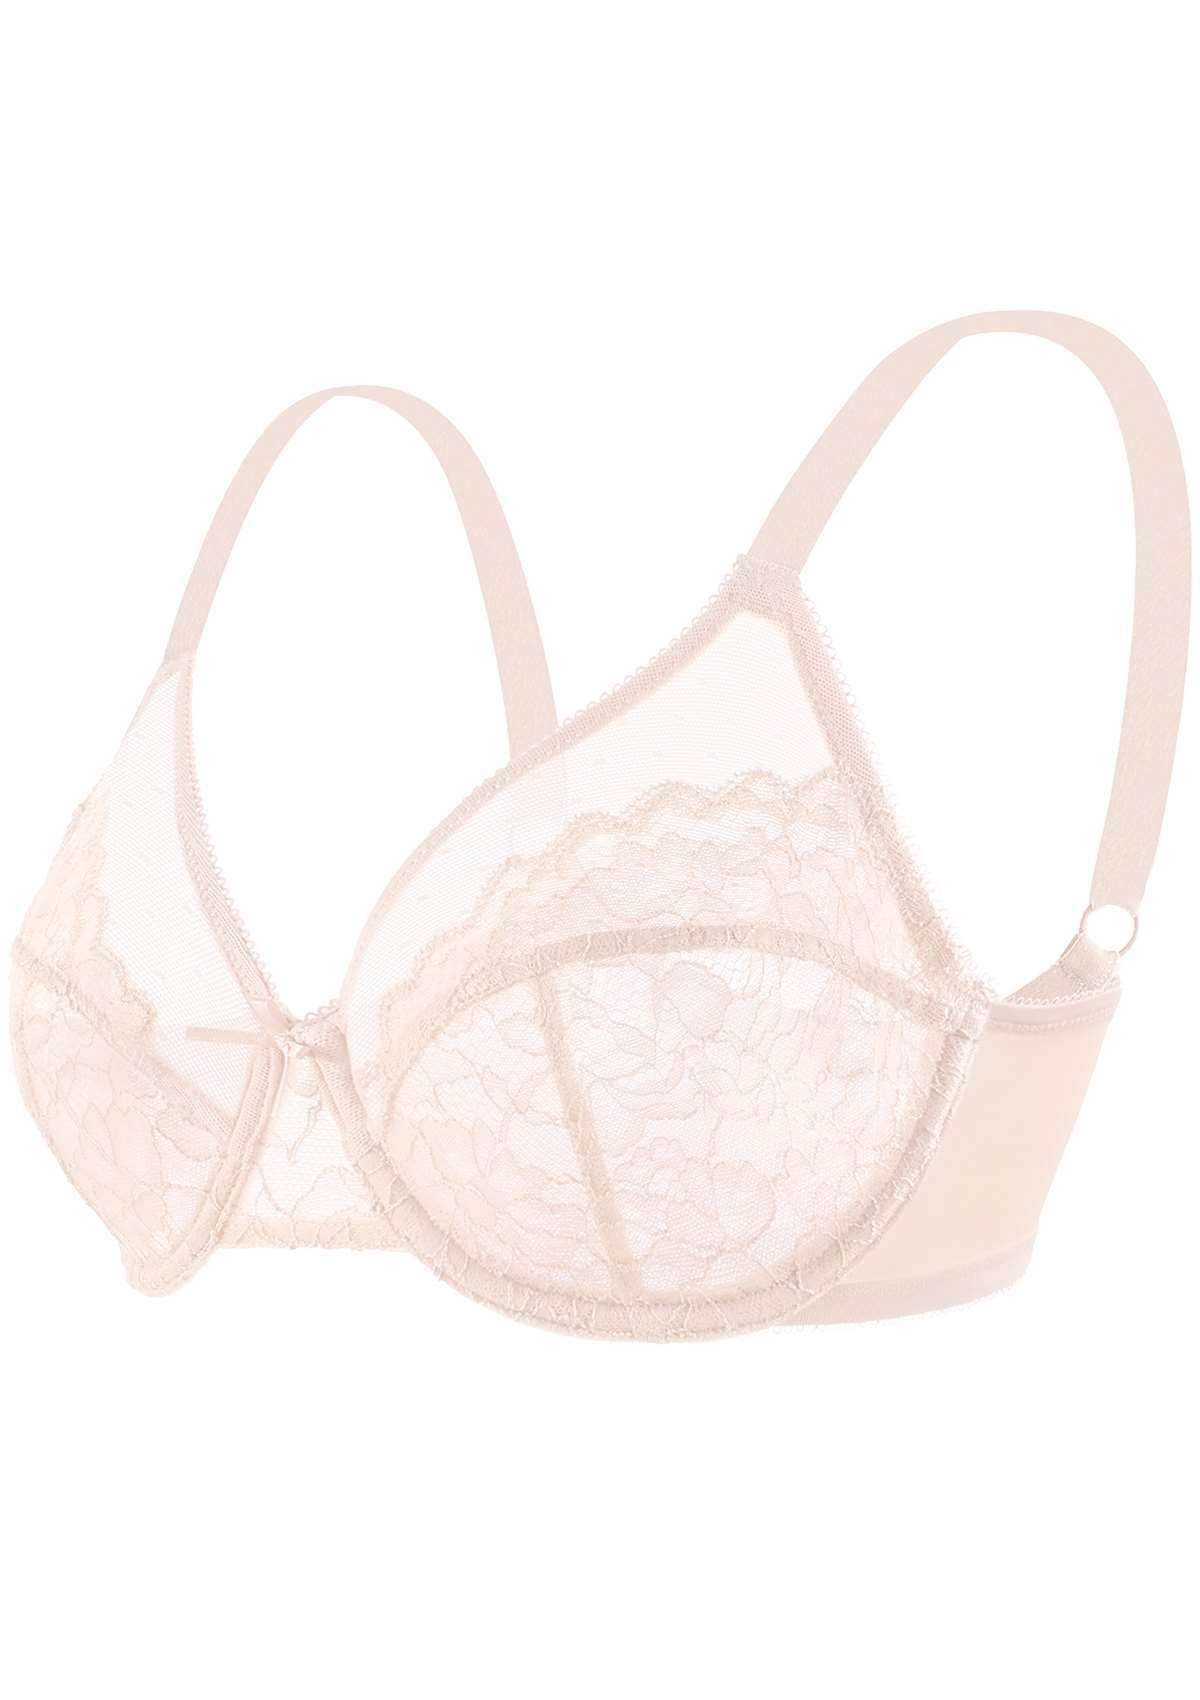 HSIA Enchante Lacy Bra: Comfy Sheer Lace Bra With Lift - Pink / 34 / D